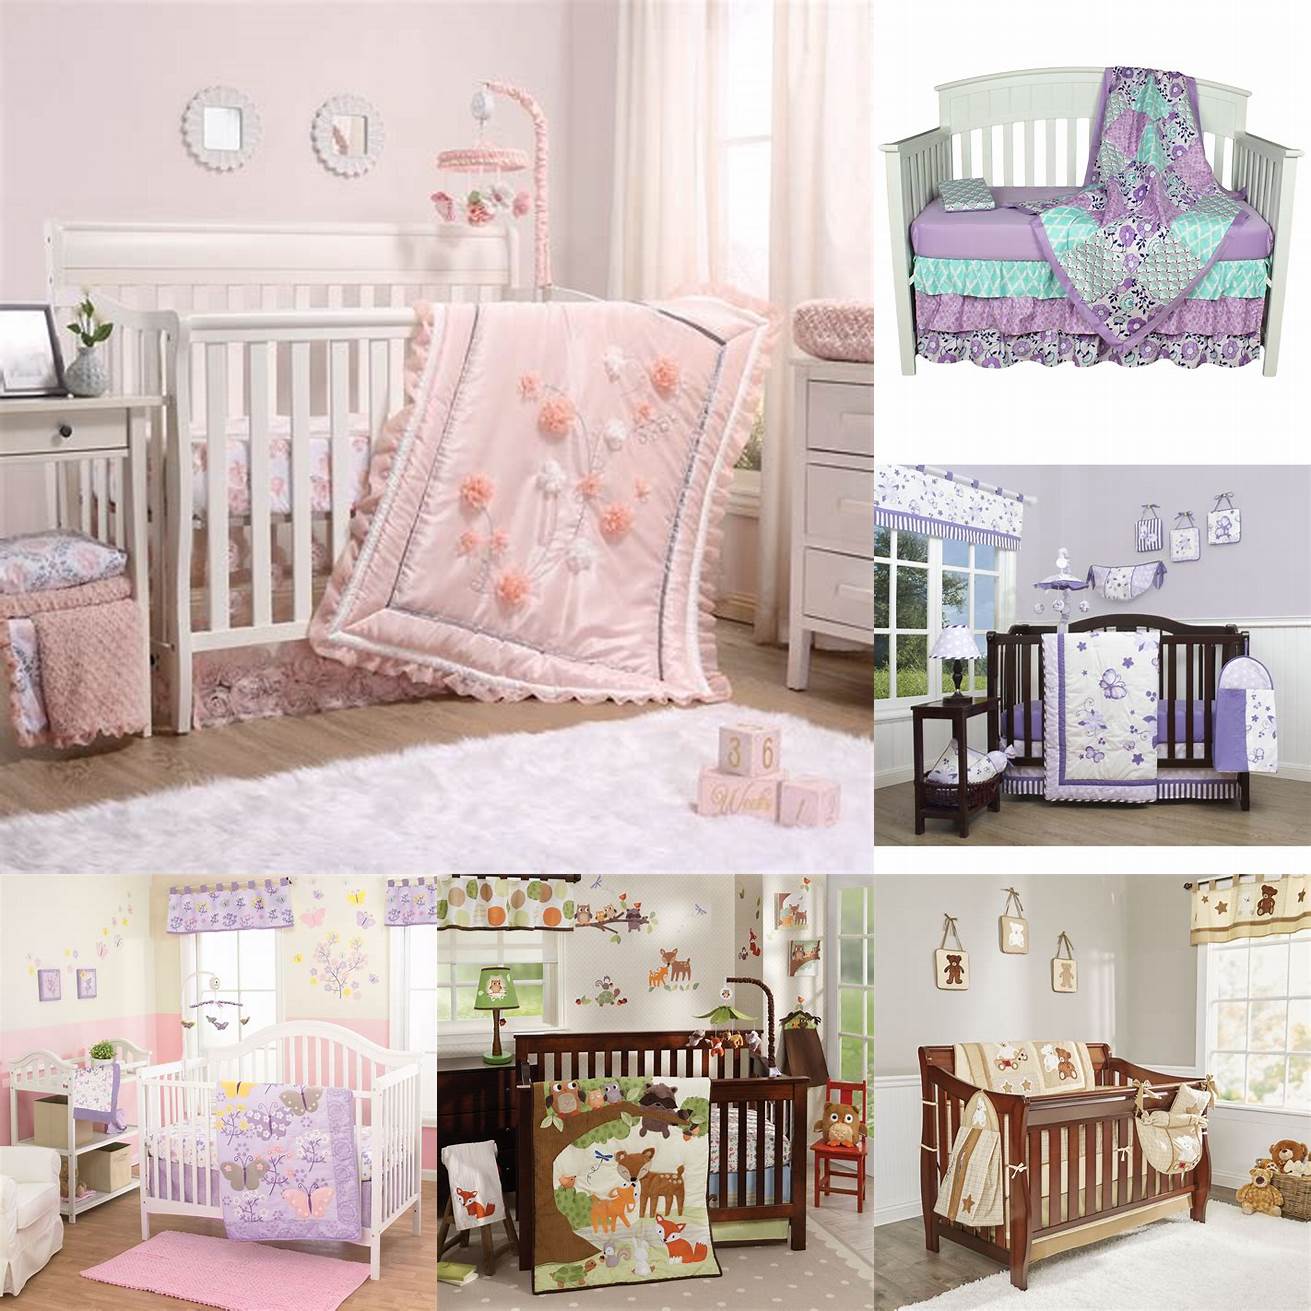 Crib Bedding Sets The most common type of nursery bedding set crib bedding sets are designed to fit standard size cribs and usually include a fitted sheet a crib skirt and a quilt or comforter